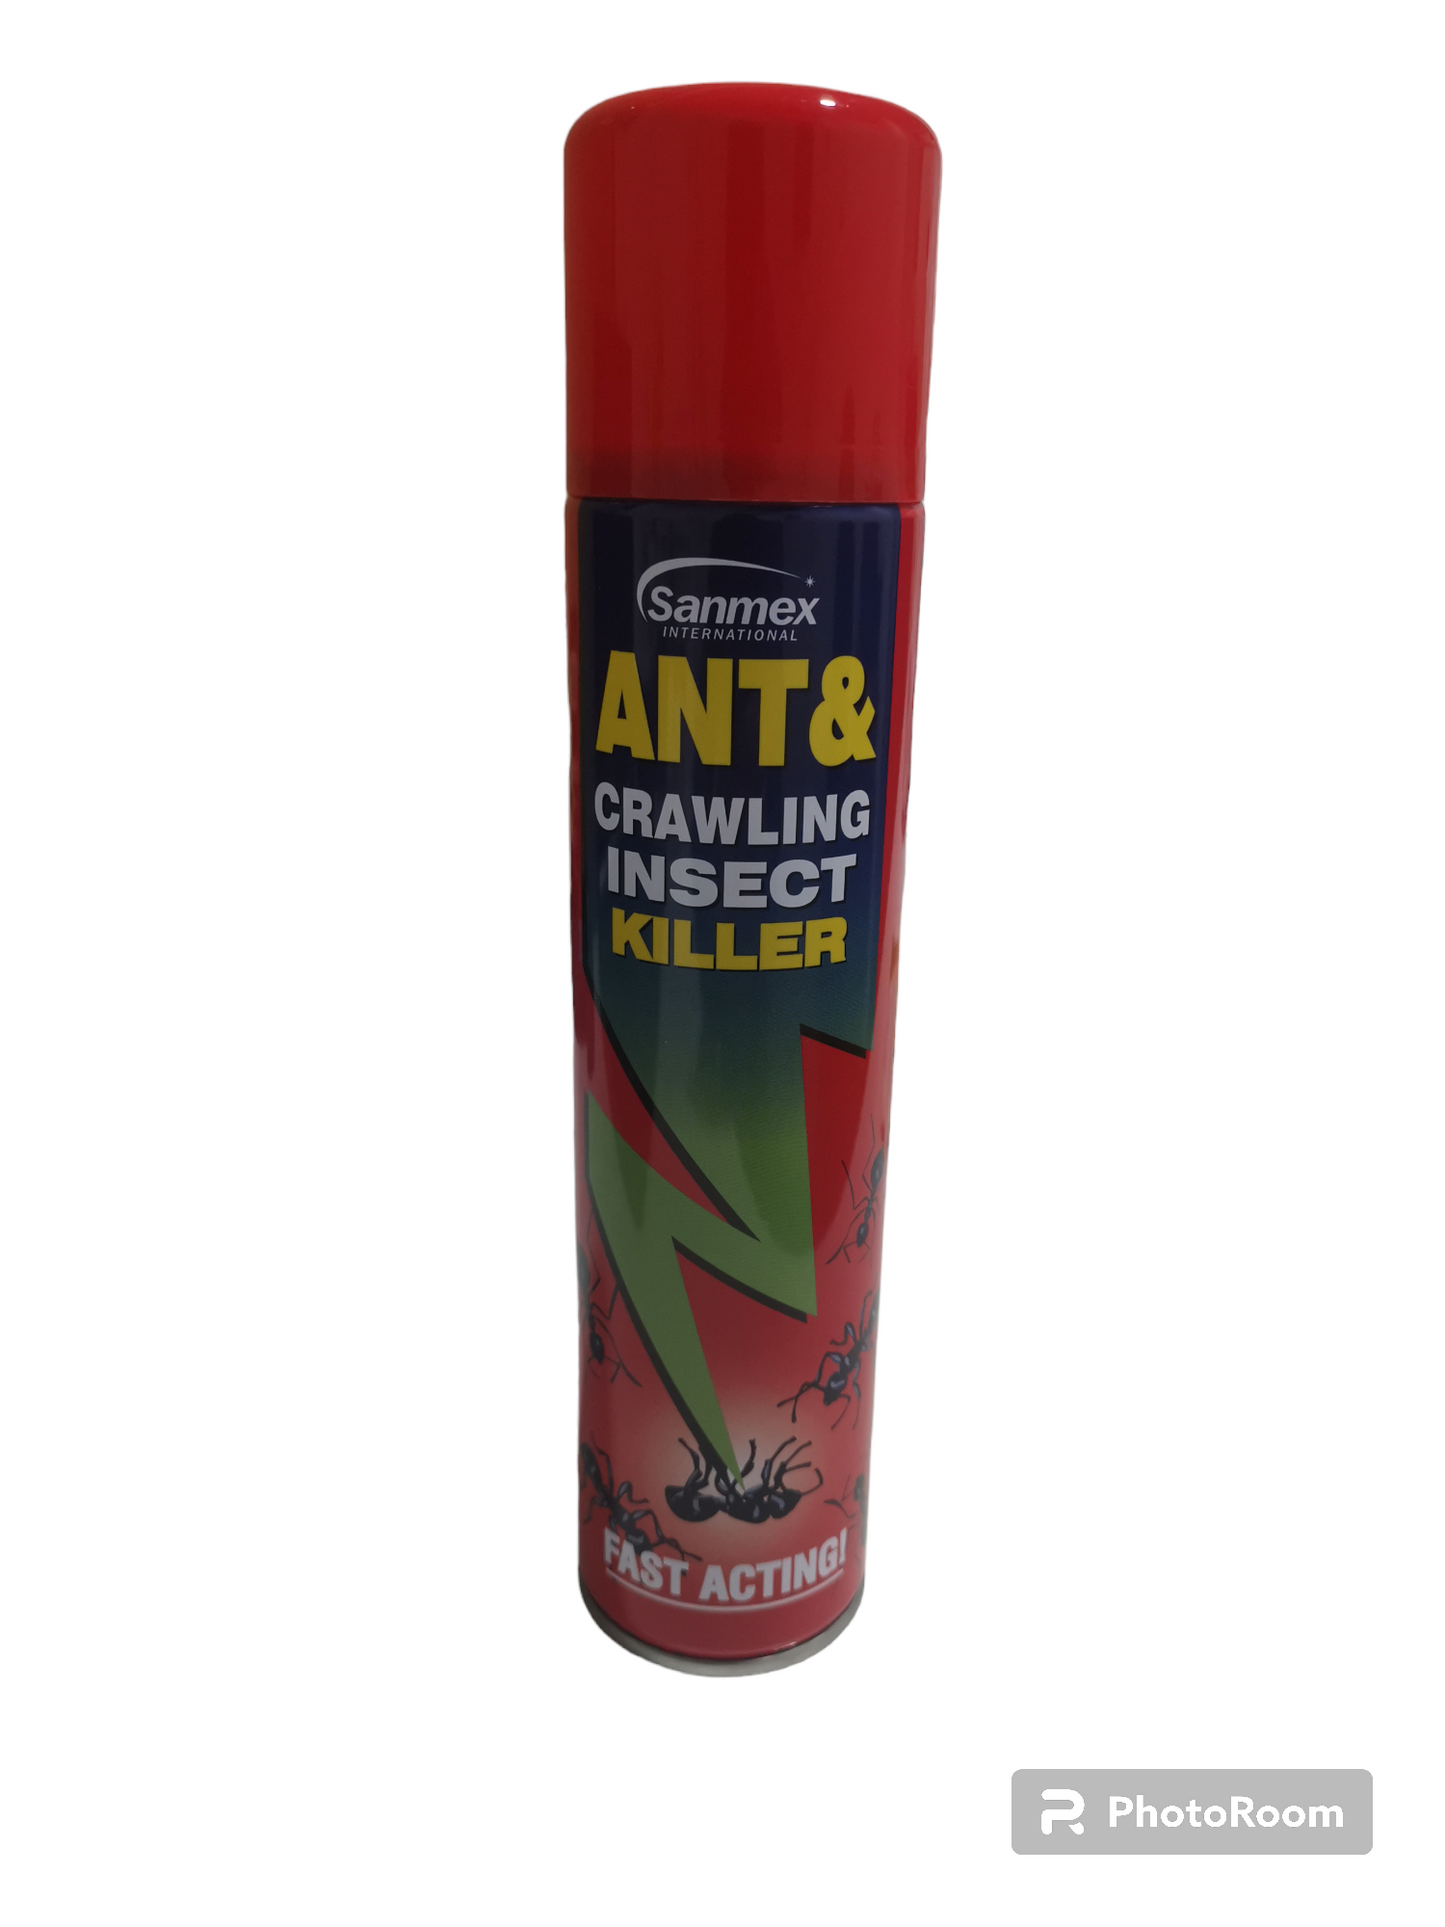 Ant & crawling insect killer